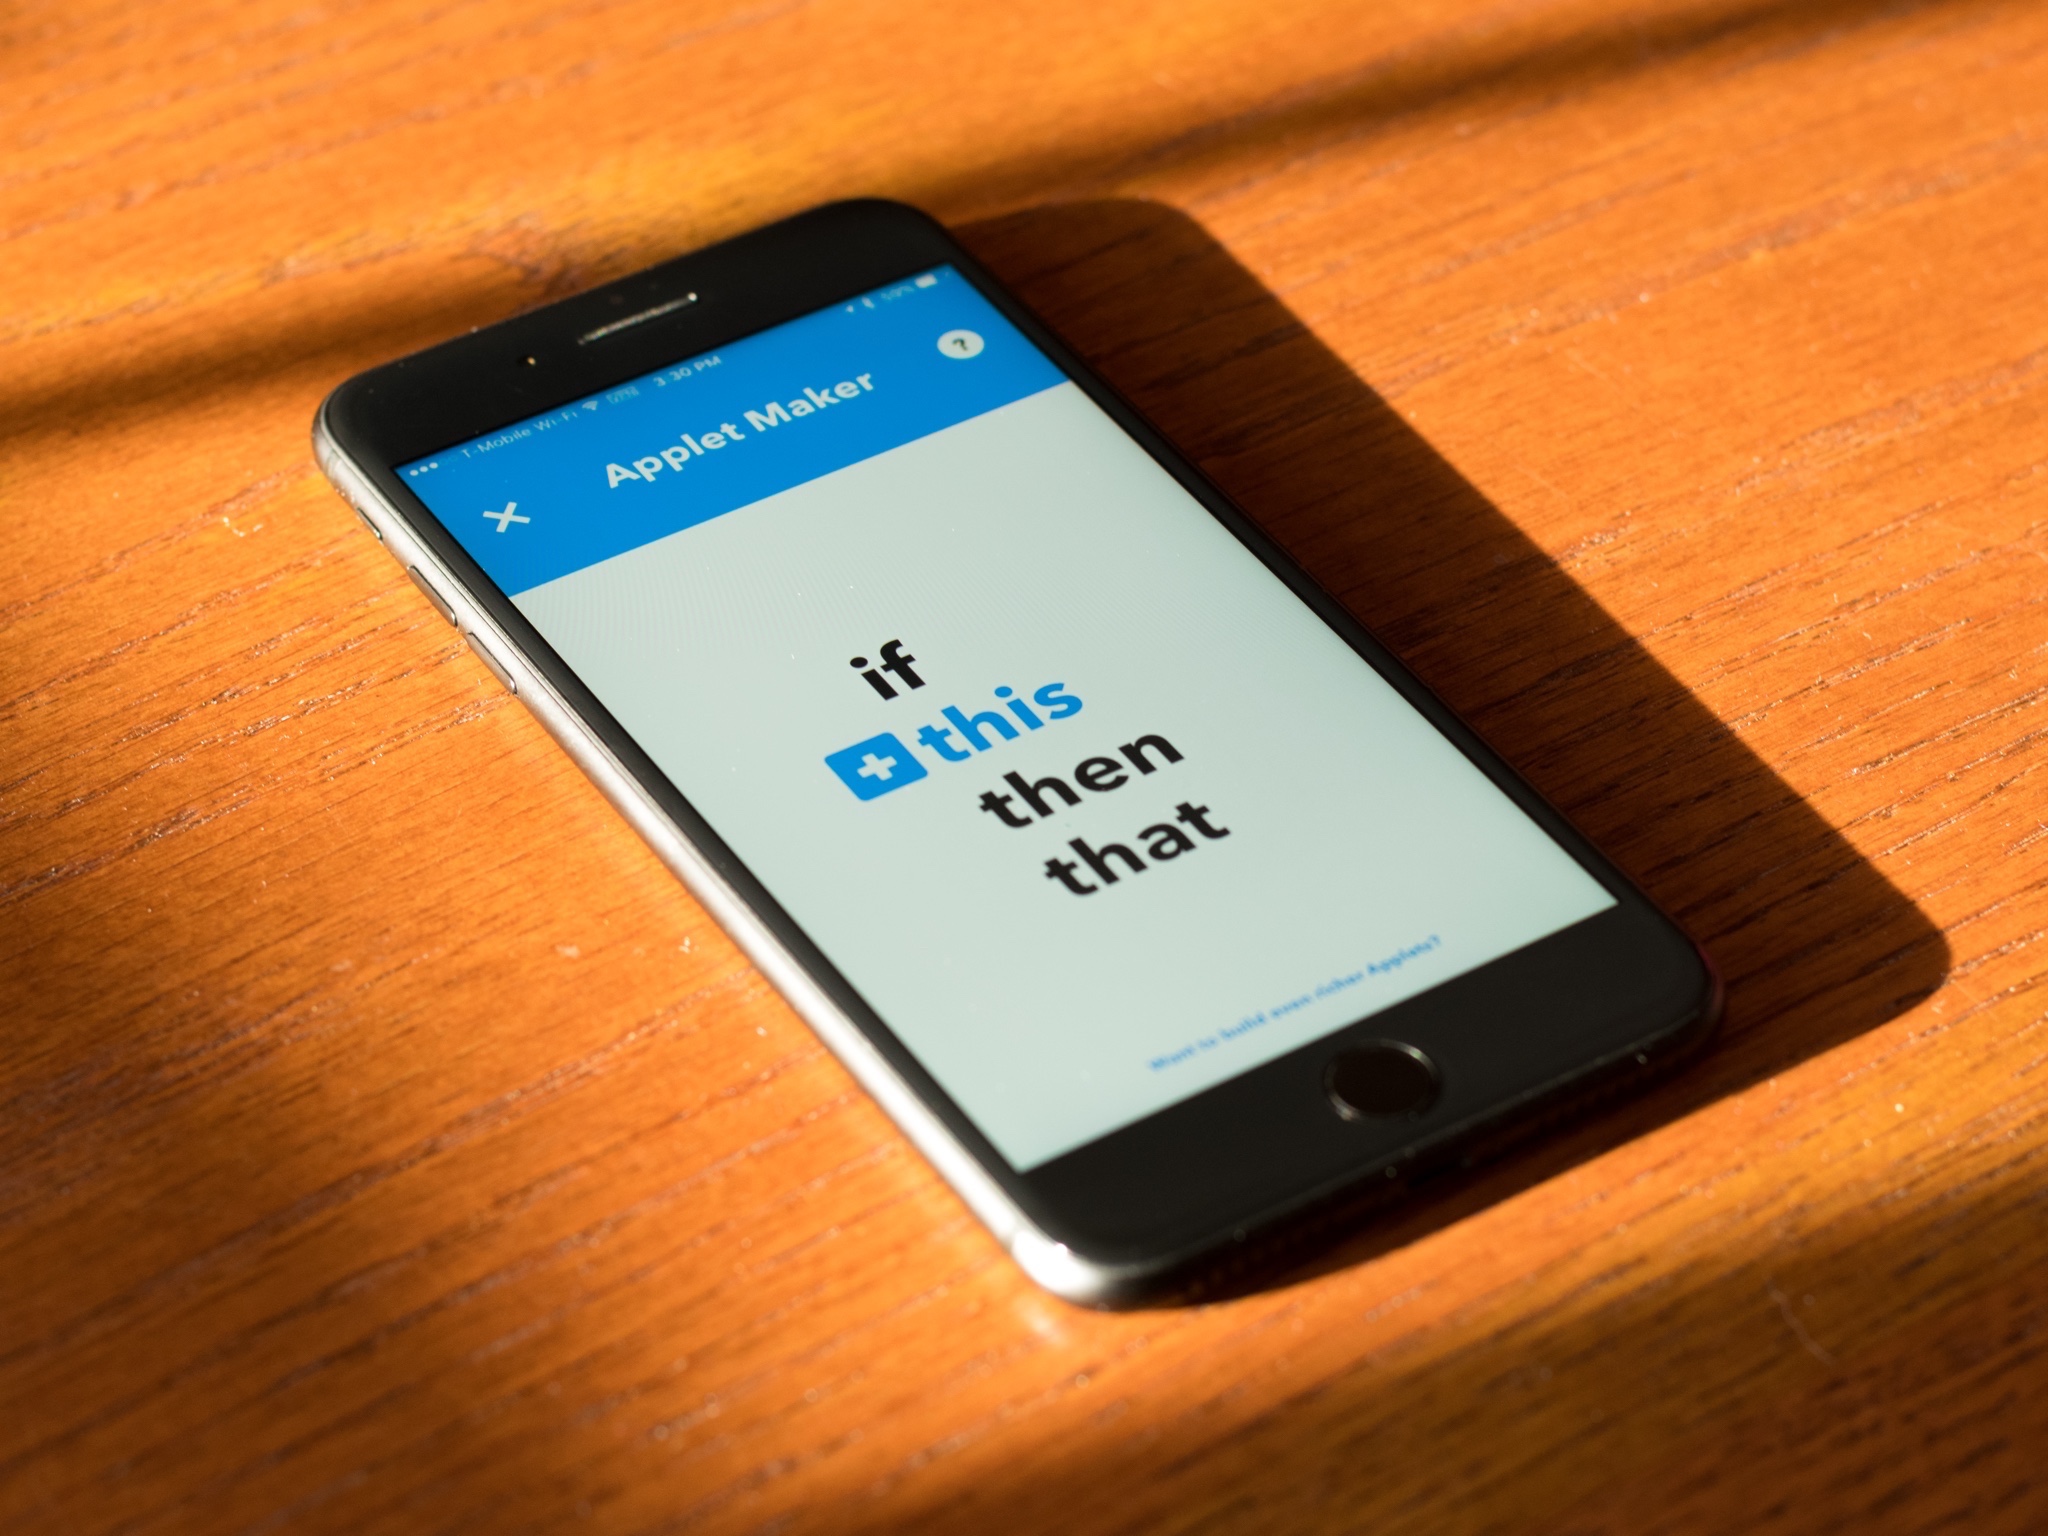 IFTTT now lets you build applets with the iOS Calendar and App Store